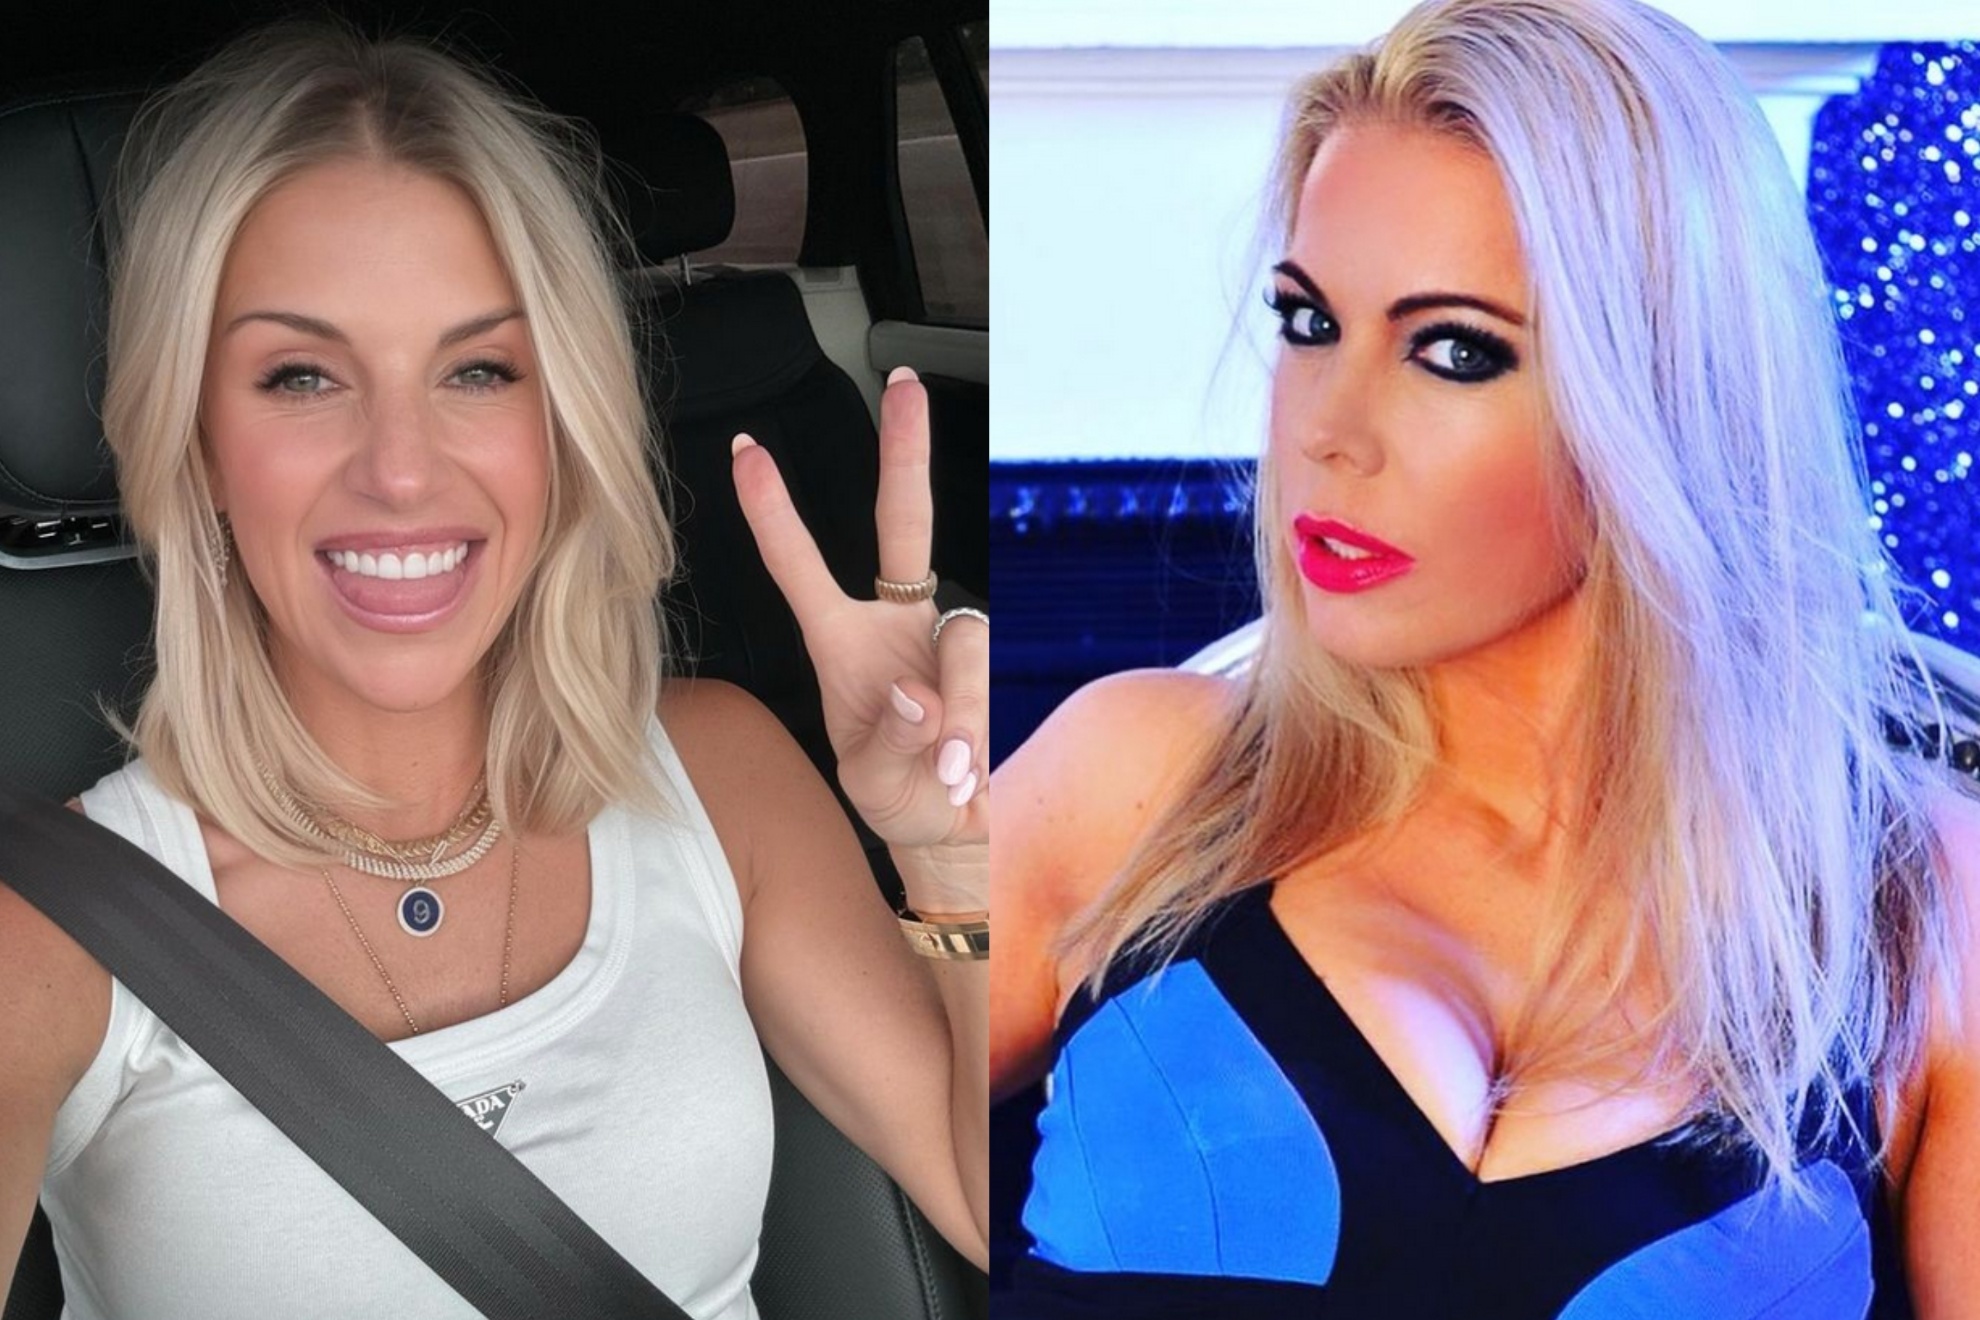 On the left, Kelly Stafford, wife of Matthew Stafford, not to be confused with Kelly Stafford (R), adult film actress.